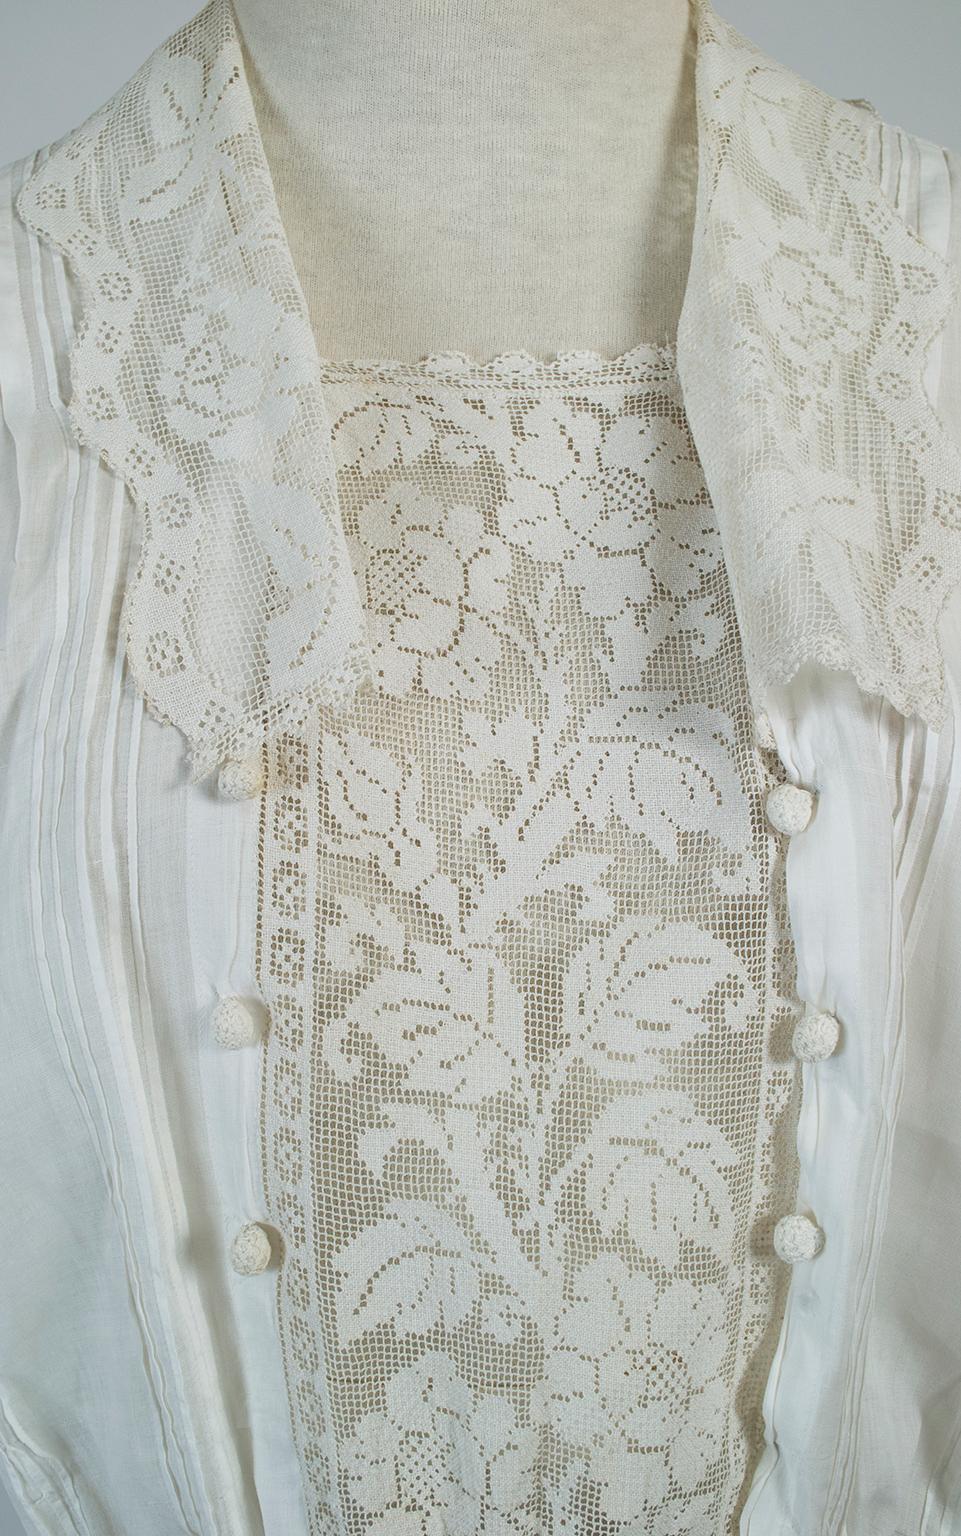 Edwardian Filet Lace Sailor Collar Blouse, 1910s In Good Condition For Sale In Tucson, AZ